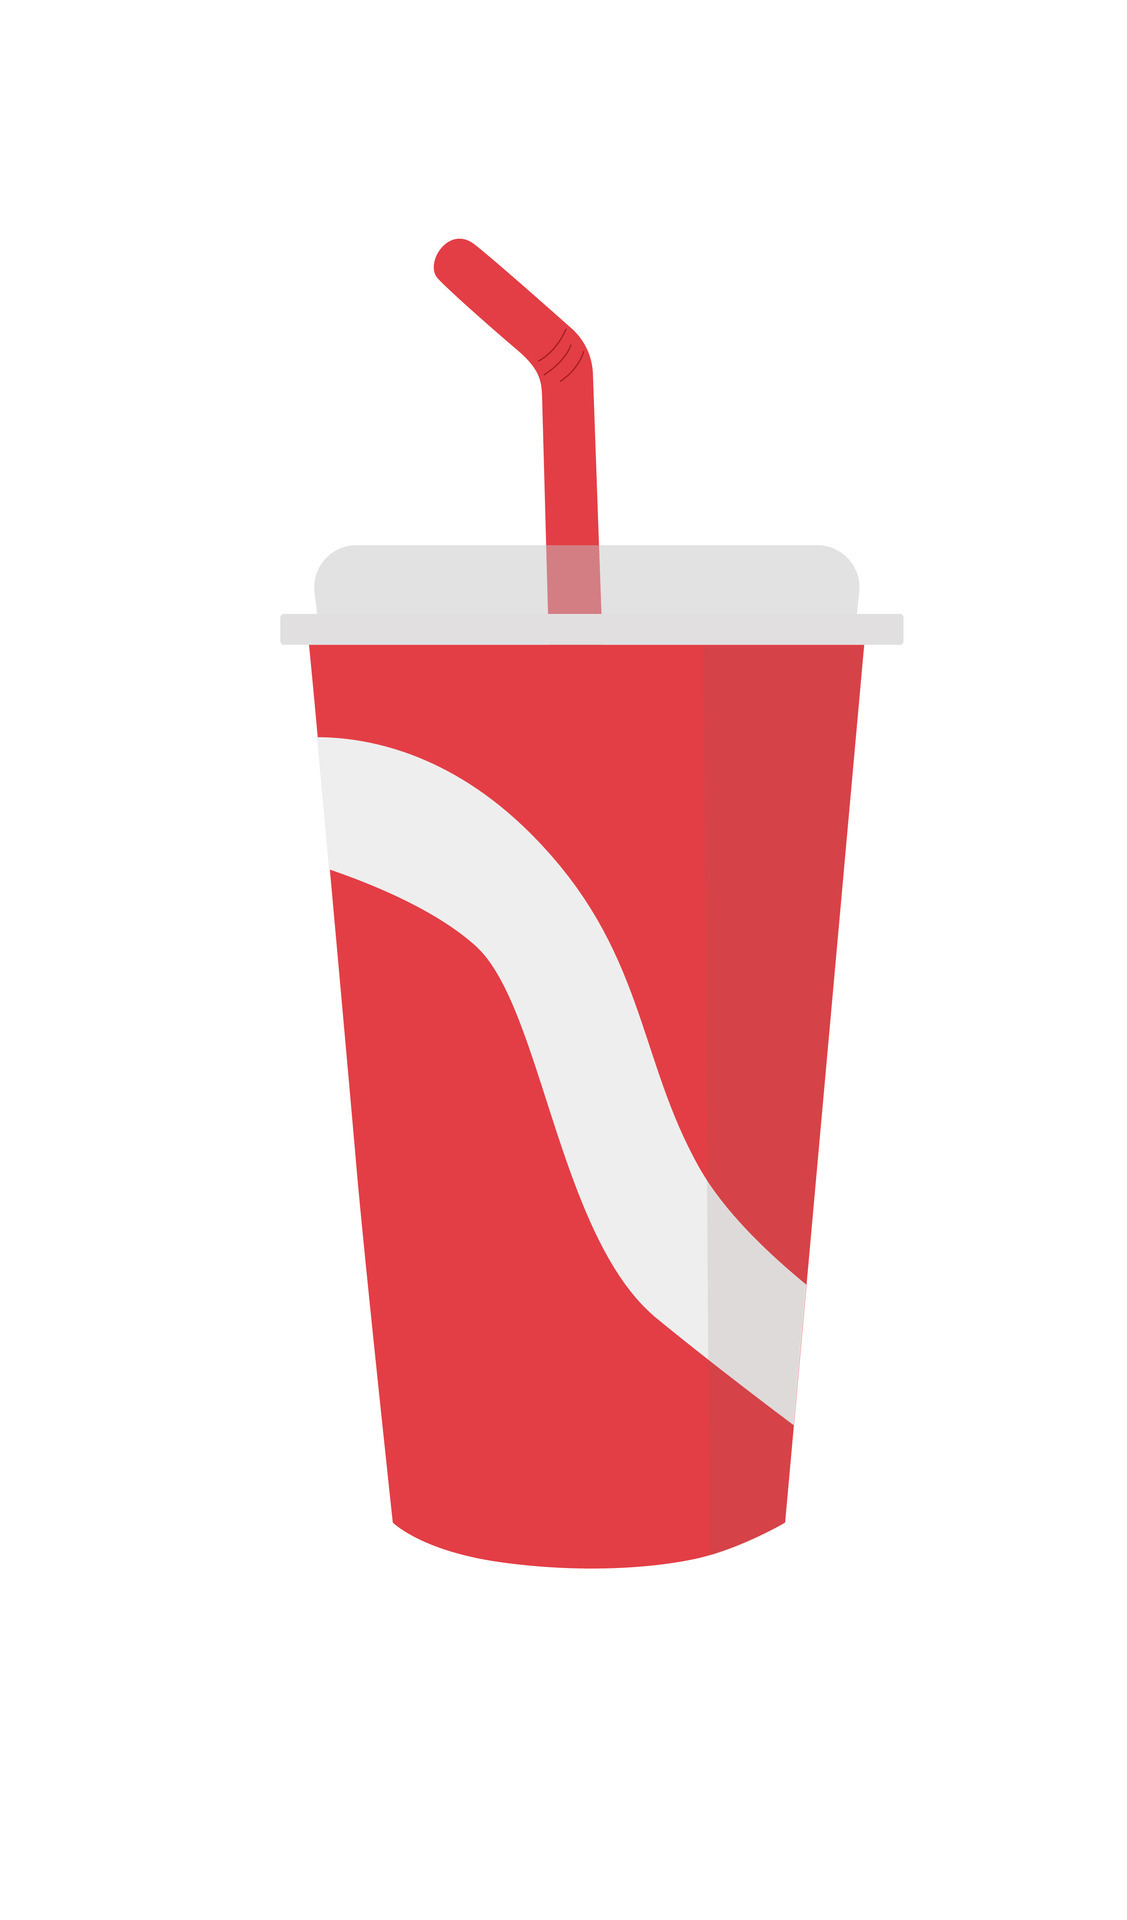 https://static.vecteezy.com/system/resources/previews/026/687/028/original/soda-cup-set-paper-cup-of-soda-with-red-straw-cinema-concept-flat-illustration-in-cartoon-style-isolated-on-white-background-beverage-cup-vector.jpg